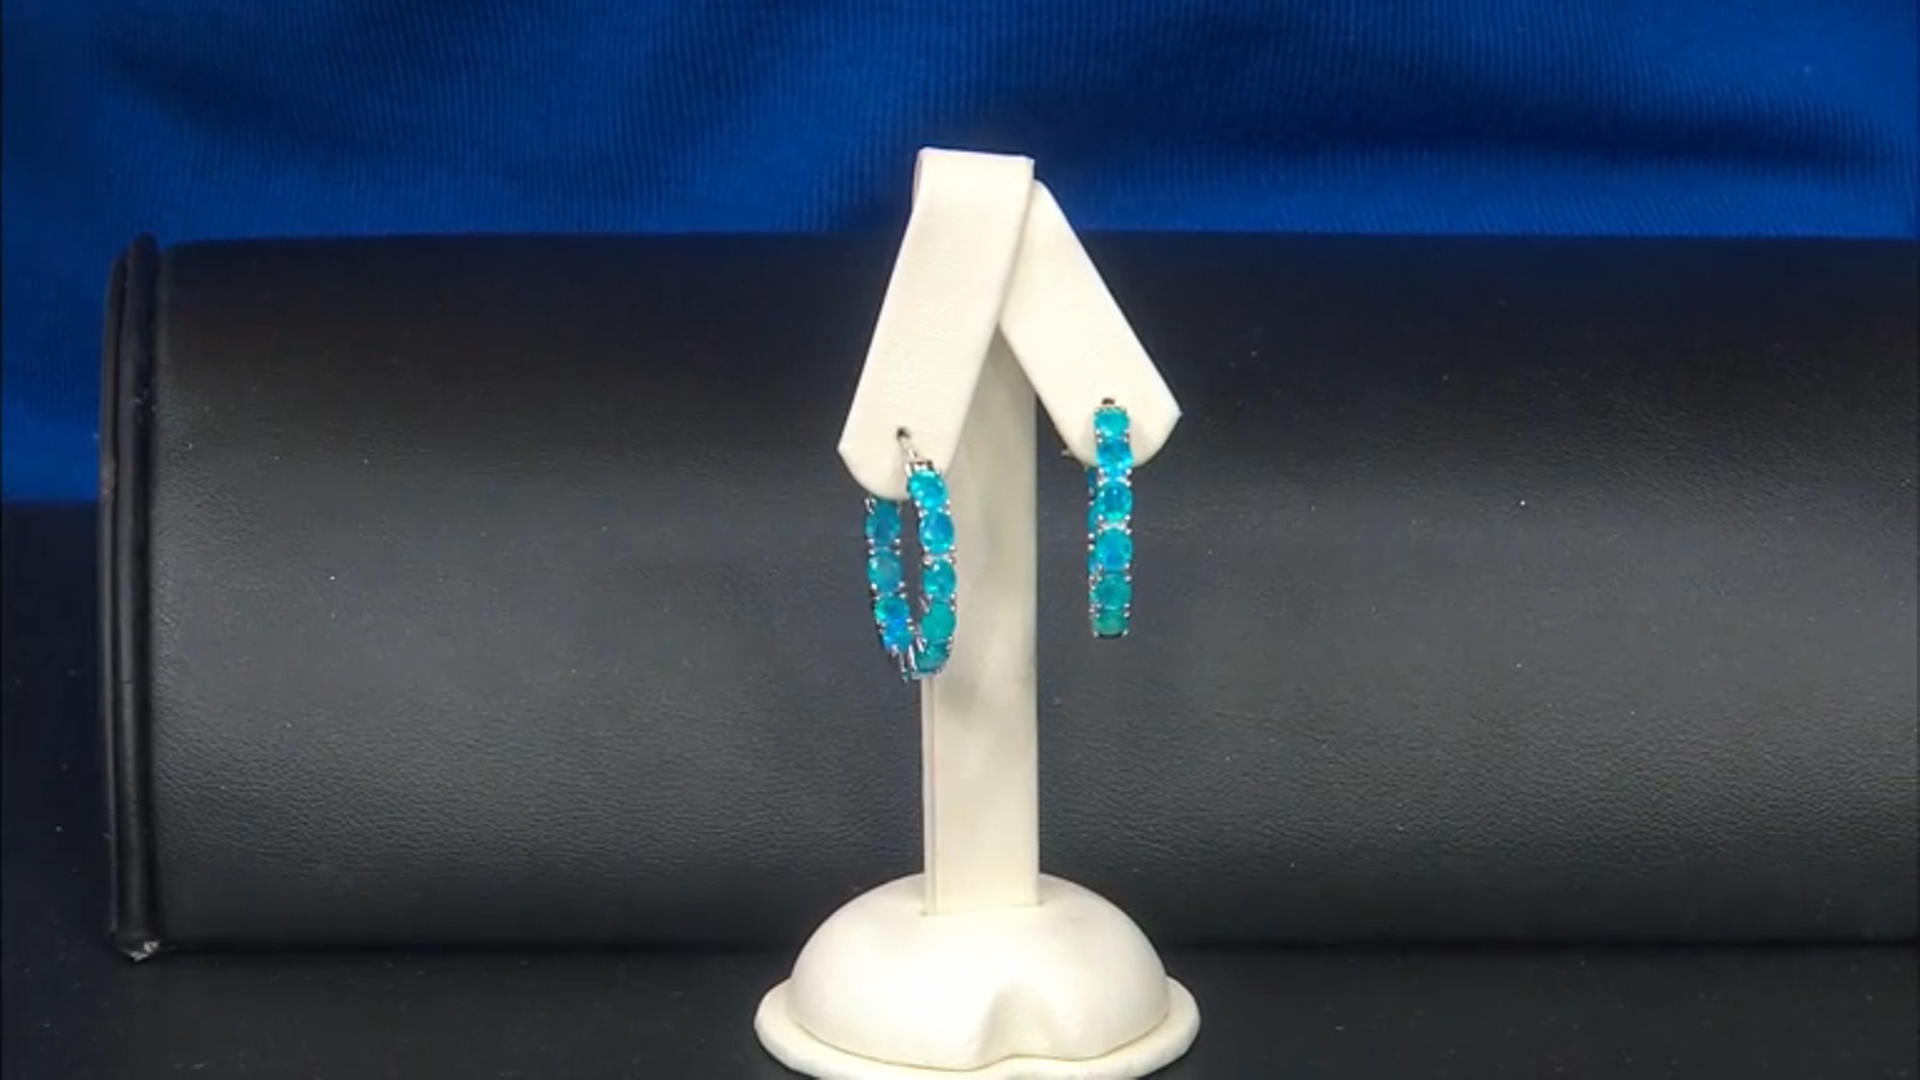 Paraiba Blue Color Opal Rhodium Over Sterling Silver Hoop Earrings 4.50ctw Video Thumbnail